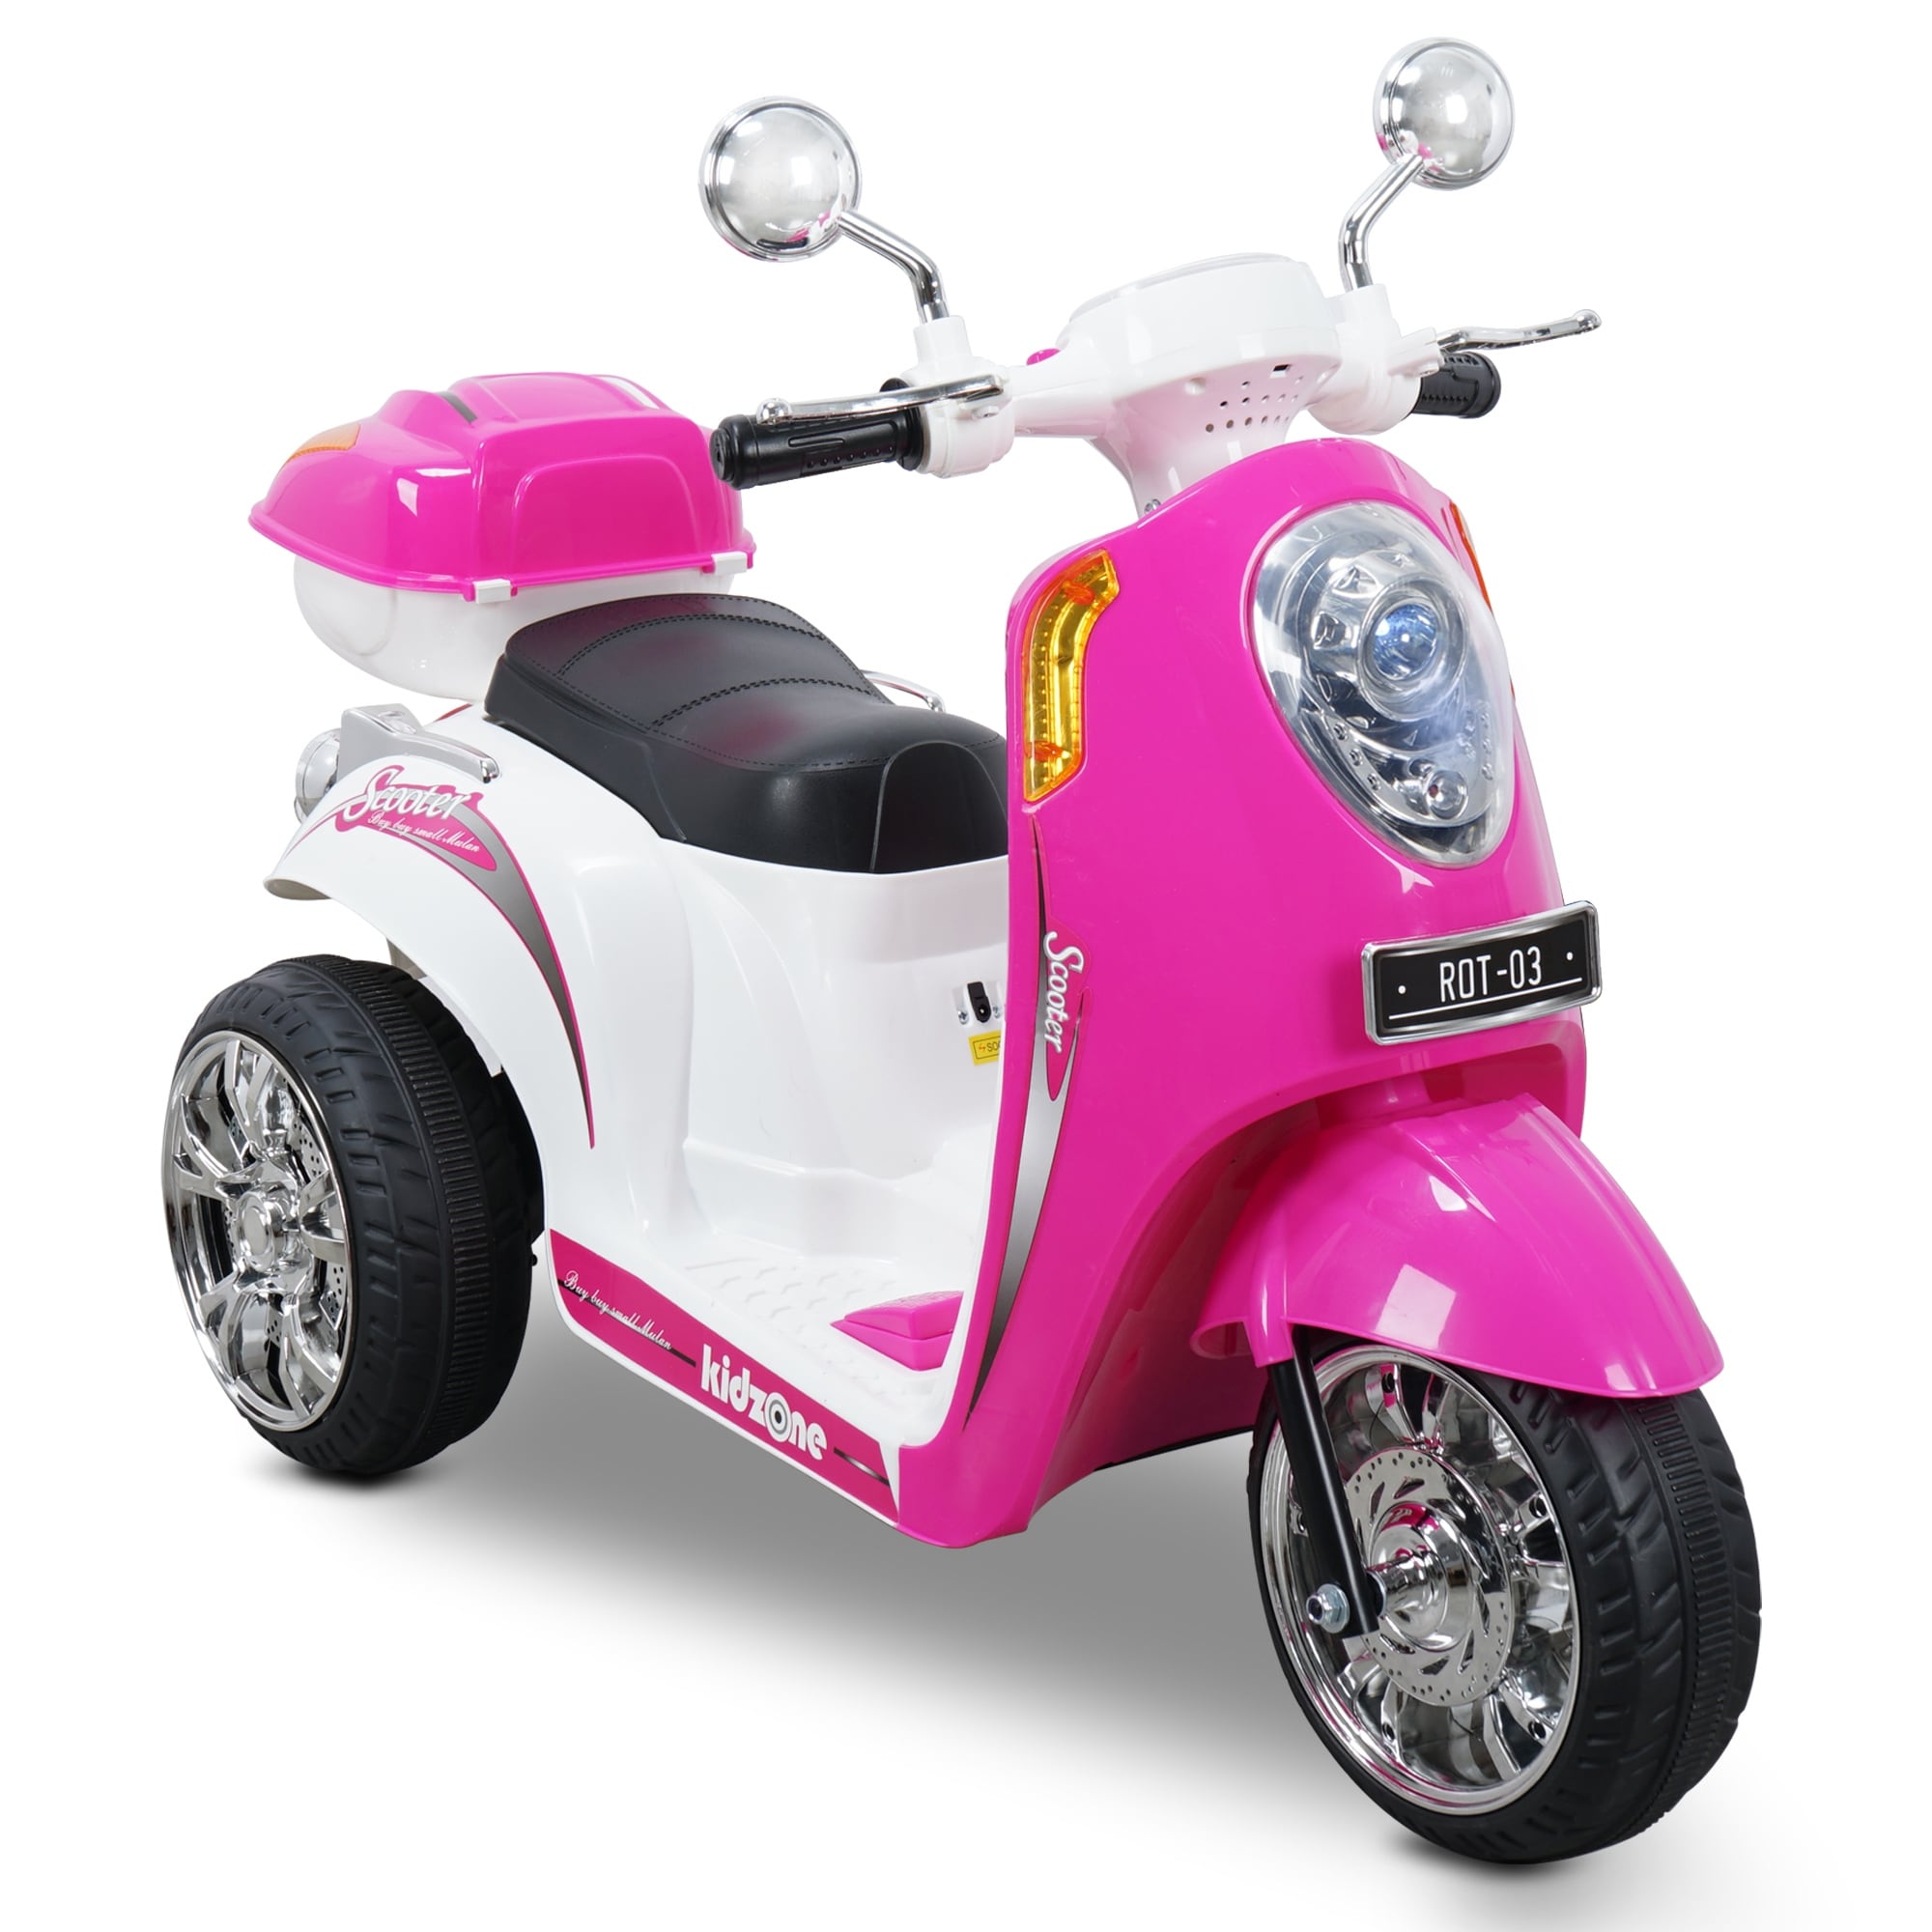 pink moped